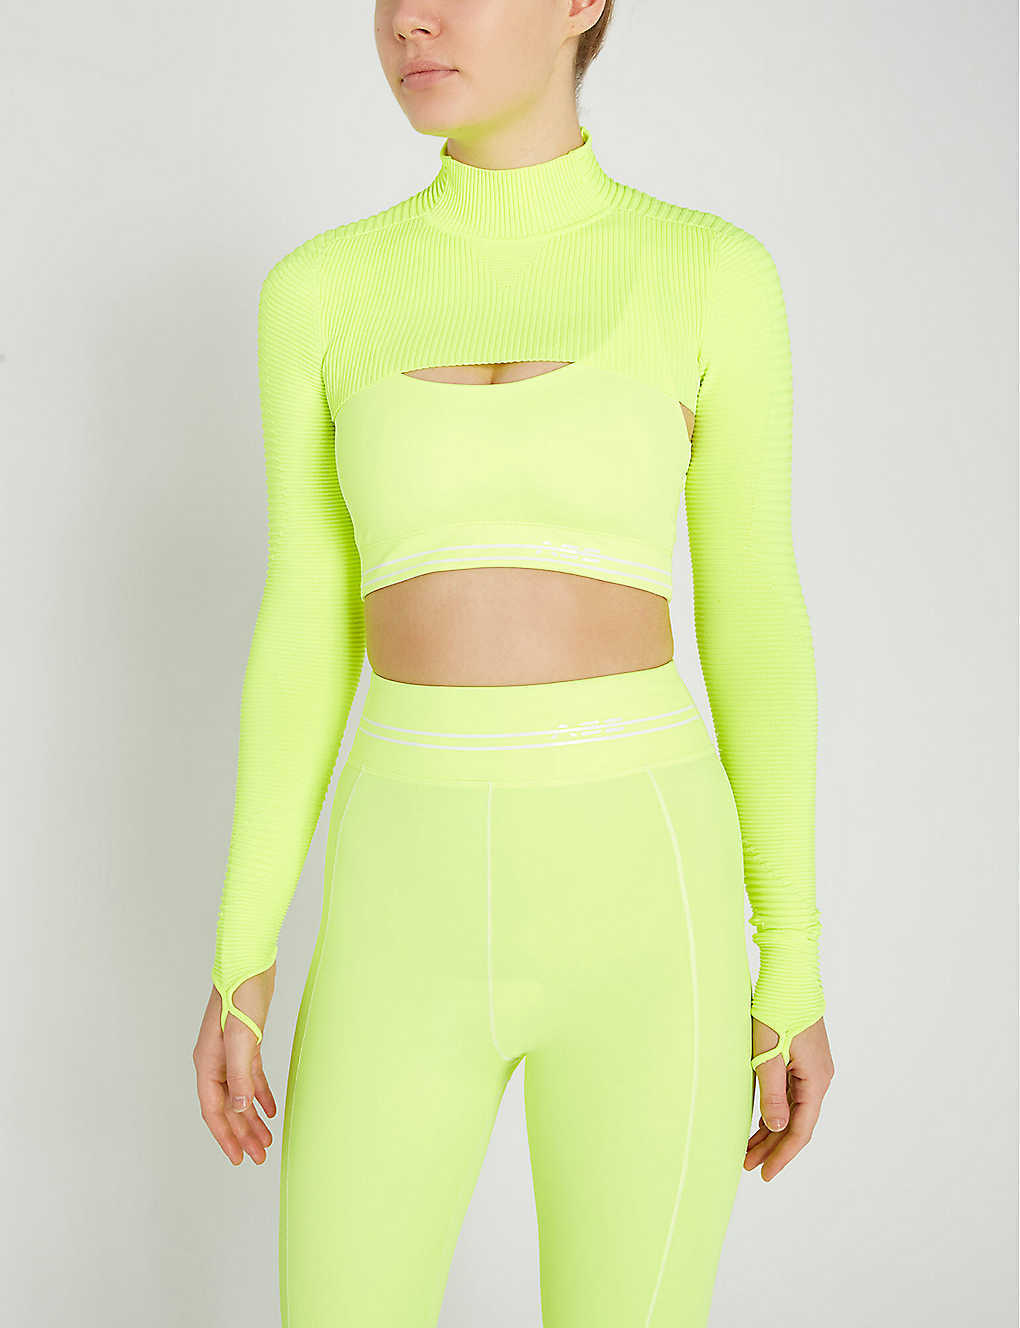 Primary image for NWT Adam Selman Sport Carbon38 Rib Knit Neon Yellow High Neck Shrug Crop Top M